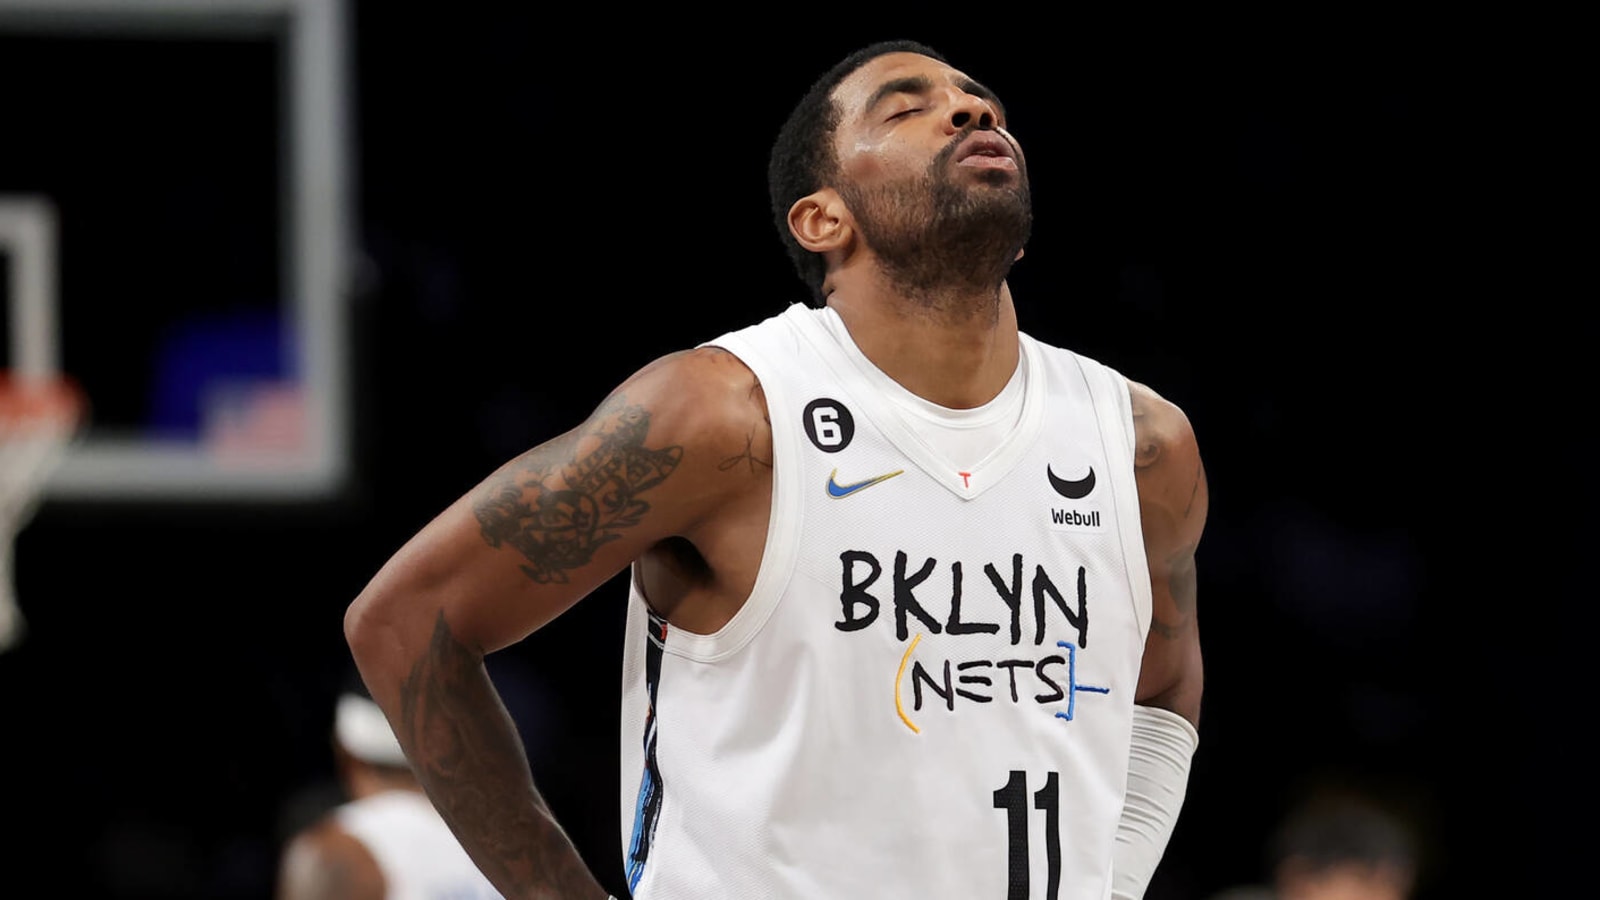 Kyrie Irving claims he was 'disrespected' by Nets